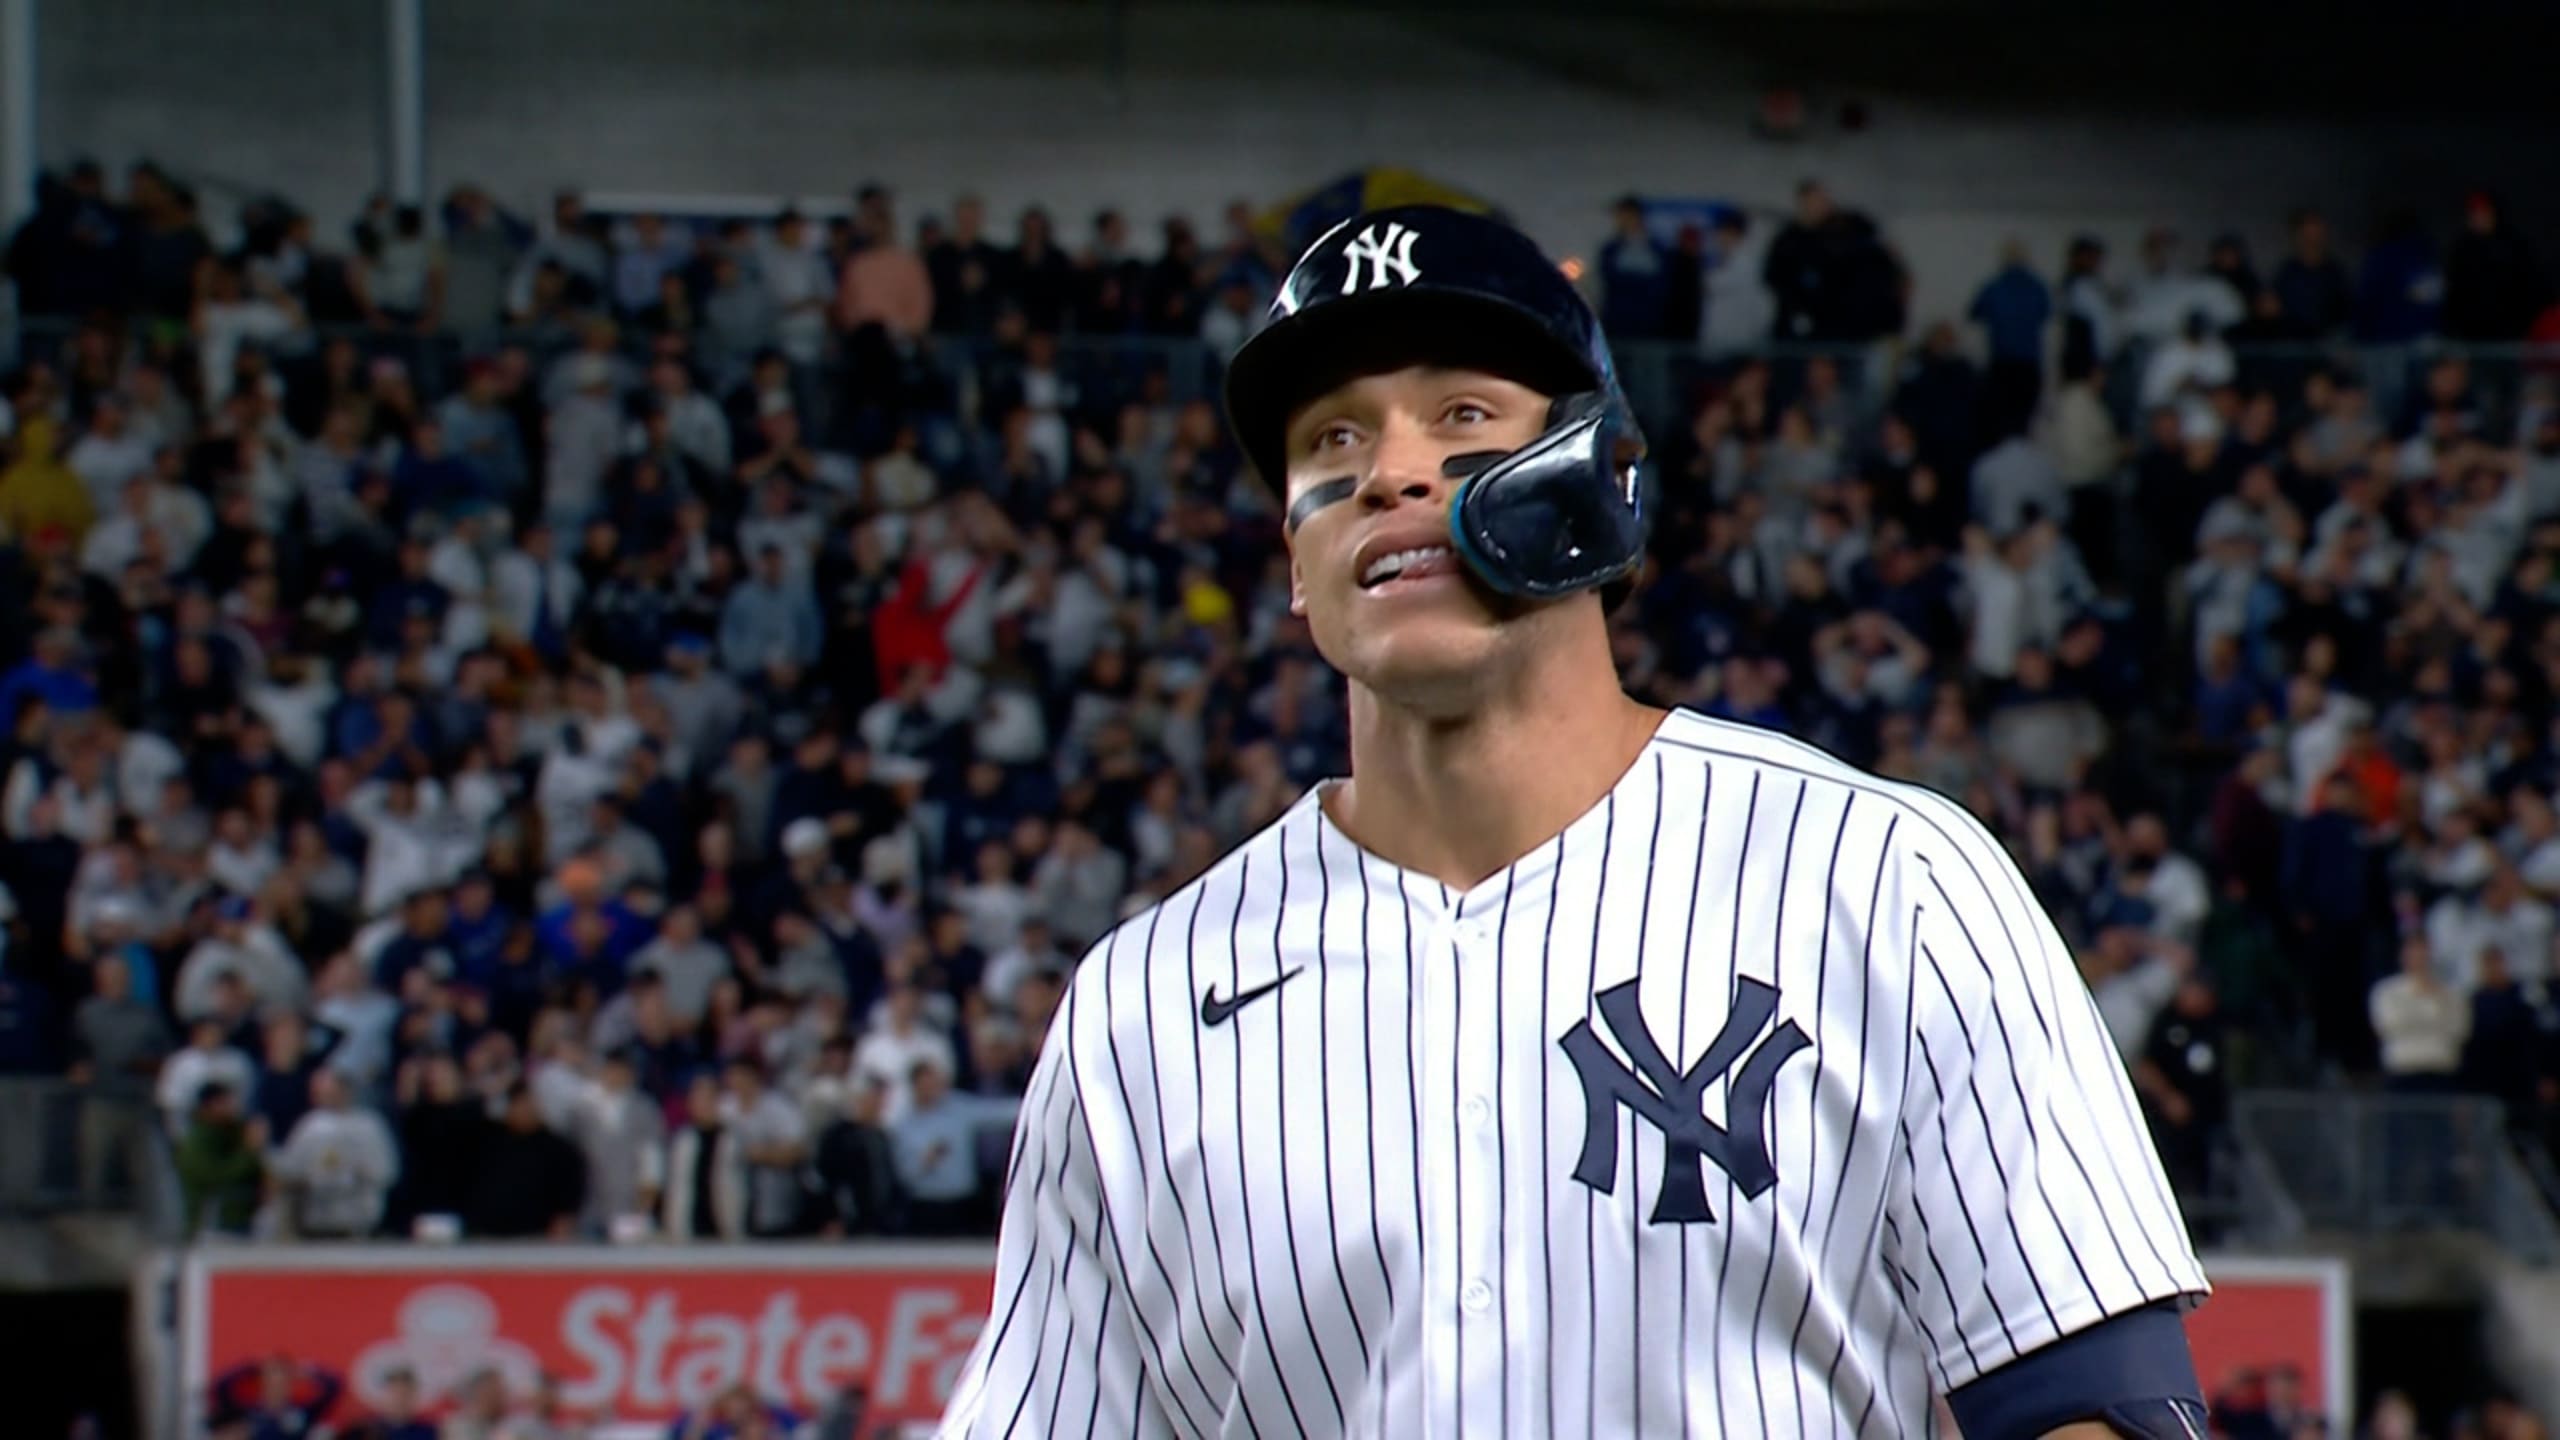 Aaron Judge meets with wife, Samantha Bracksieck, after 60th homer